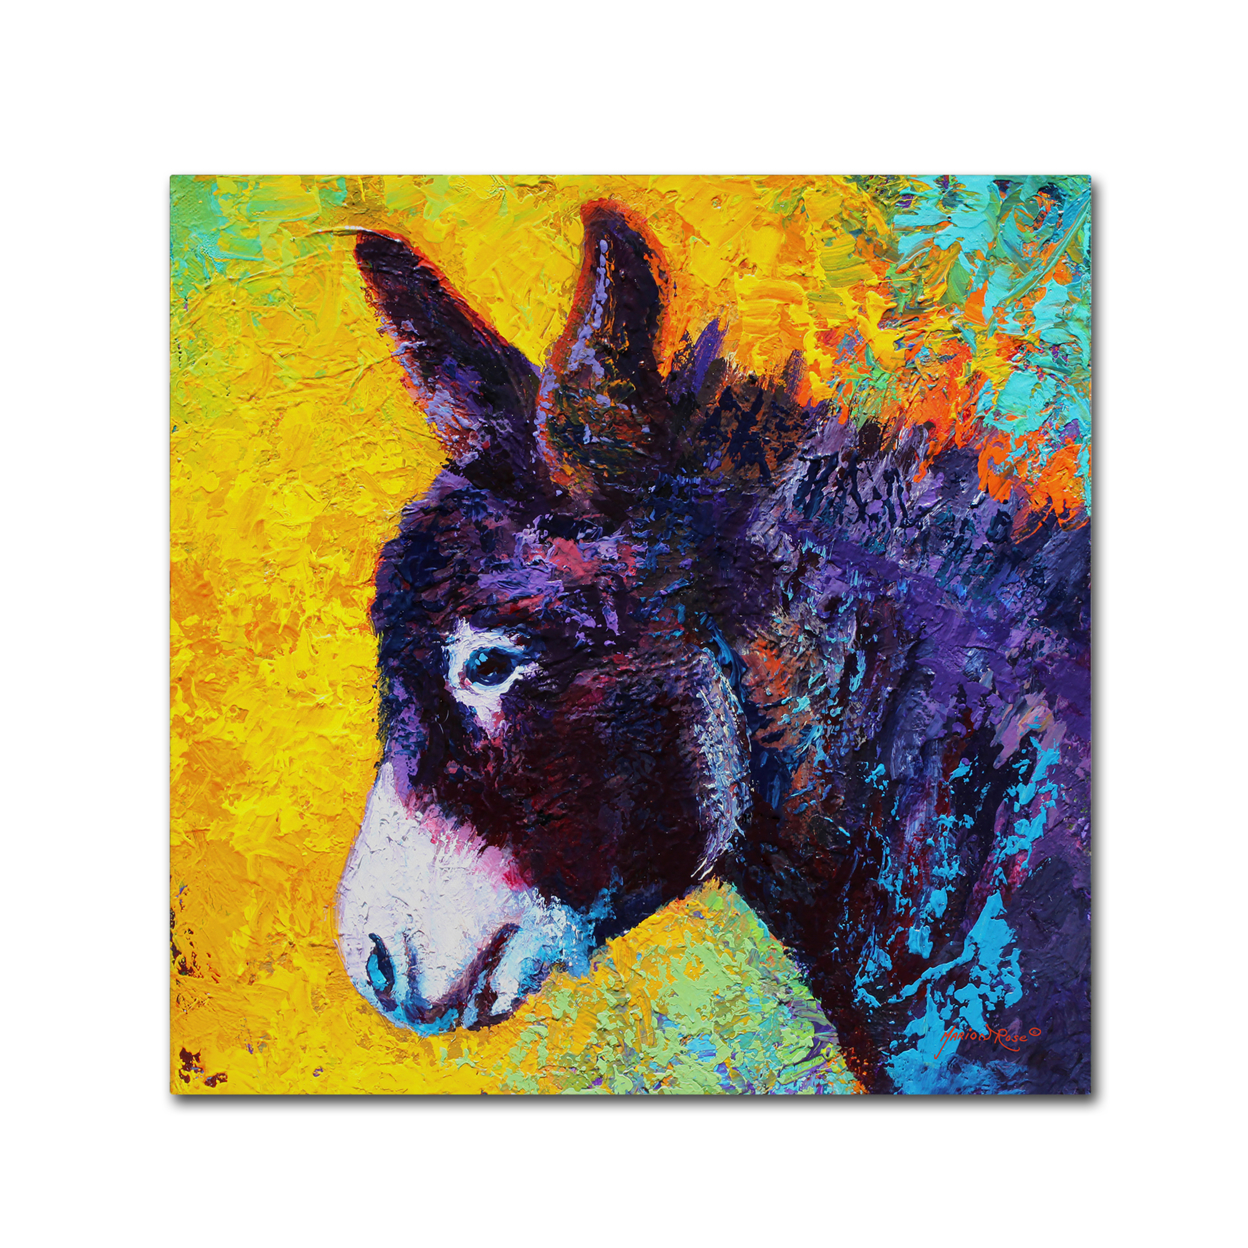 Marion Rose 'Donkey Sparky' Ready To Hang Canvas Art 35 X 35 Inches Made In USA